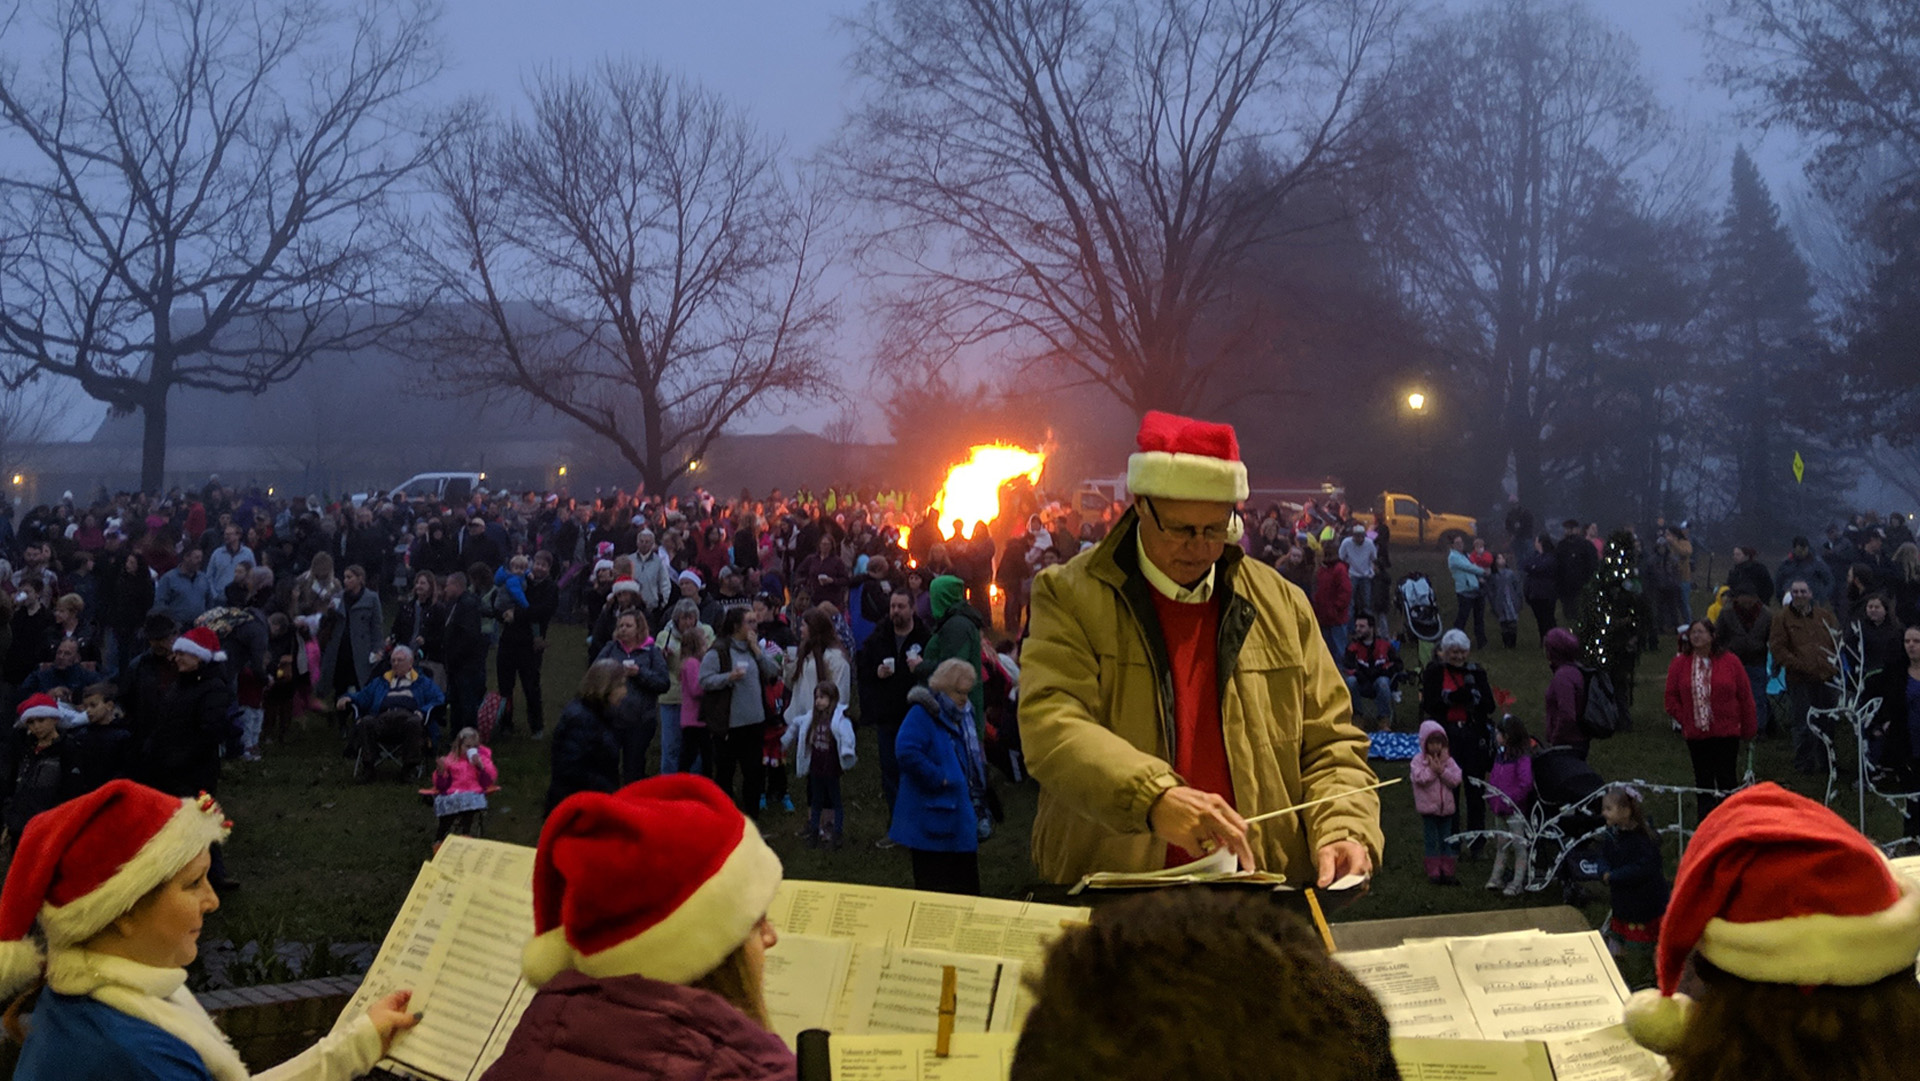 Performing at the Holiday Tree Lighting (2018)